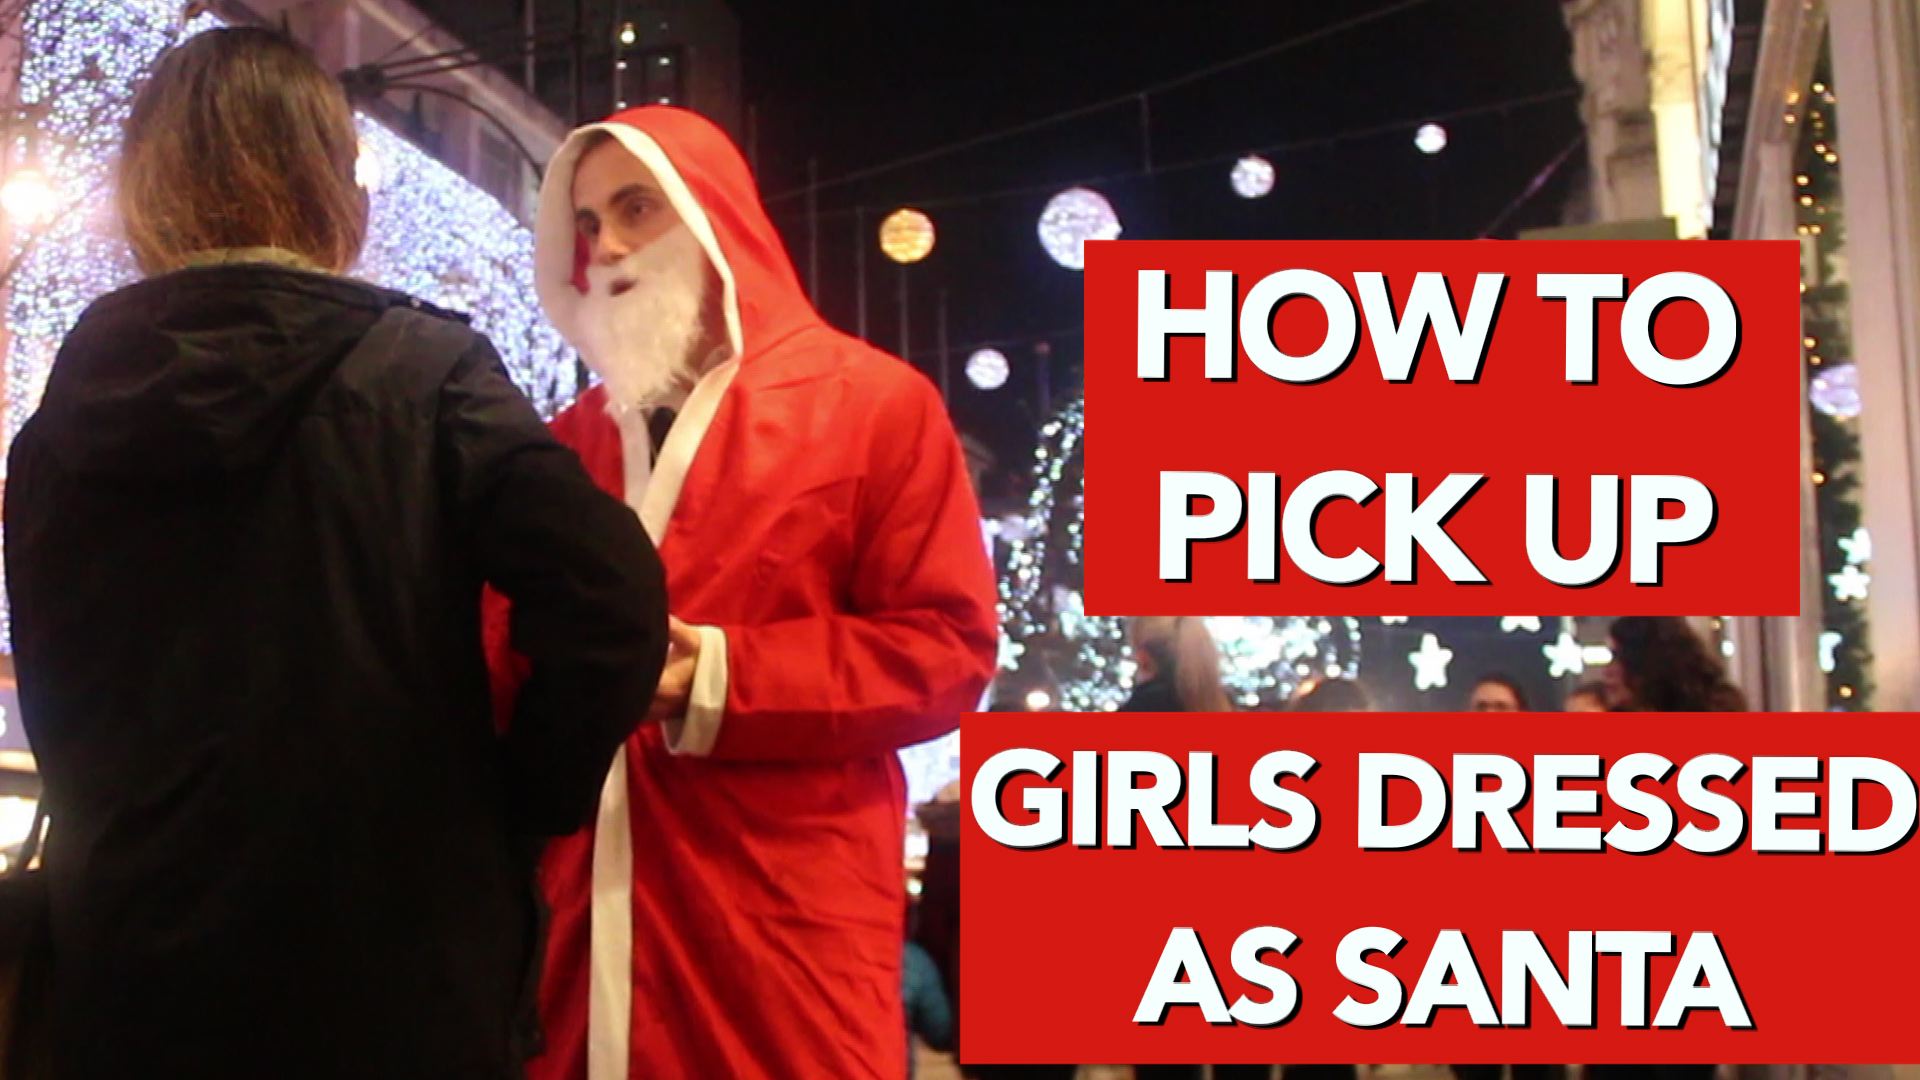 How to pick up girls dressed as Santa